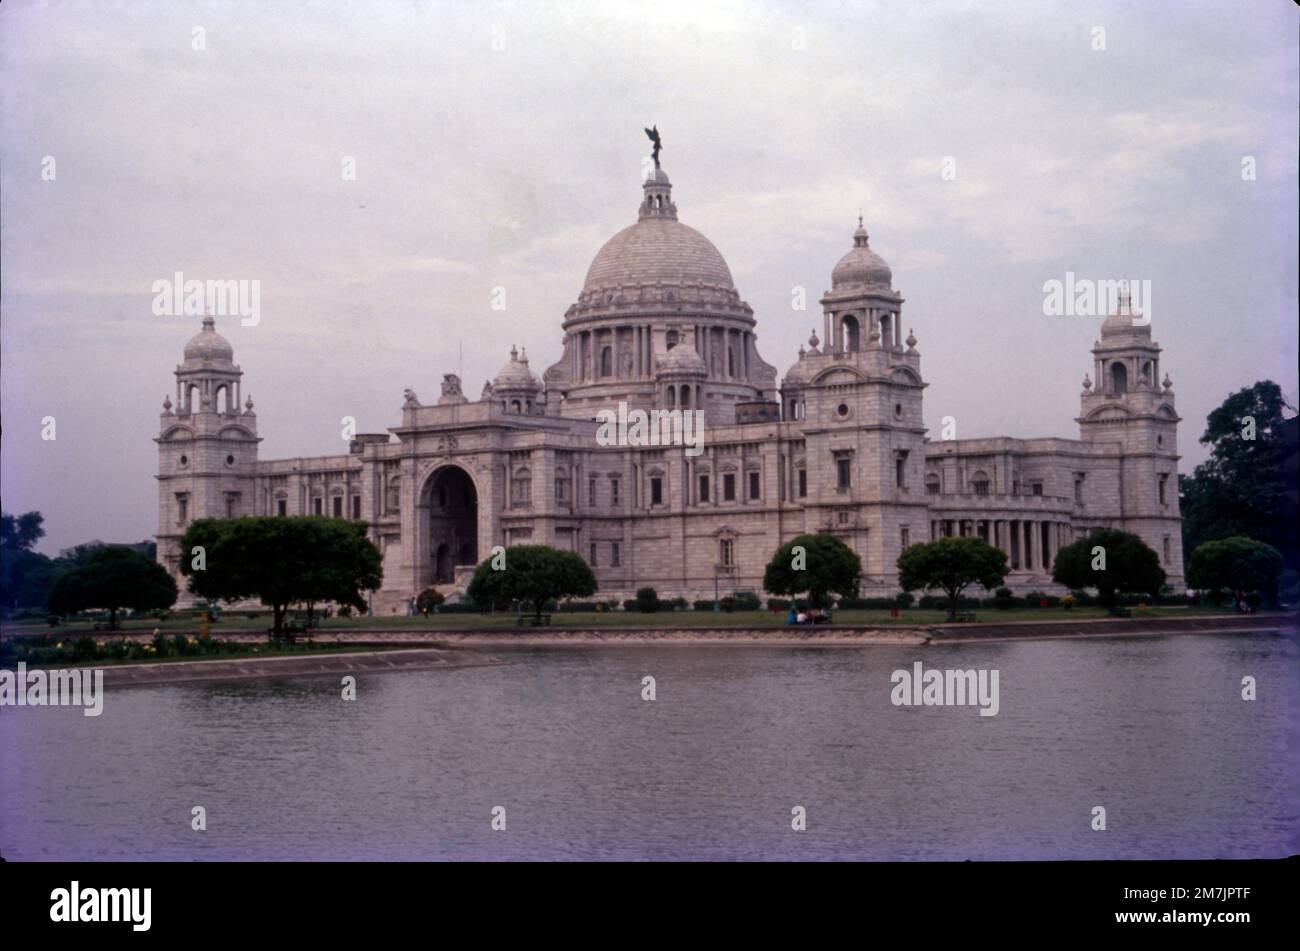 The Victoria Memorial is a large marble building on the Maidan in Central Kolkata, built between 1906 and 1921. It is dedicated to the memory of Queen Victoria, Empress of India from 1876 to 1901. Representing the resplendent and majestic British architecture, Victoria Memorial Hall stands today, as a veritable icon of the city of Kolkata. Located on 1 Queen's way, the VMH was envisaged by Lord Curzon, the Viceroy of British India, as a memorial to the deceased Queen Victoria. Stock Photo